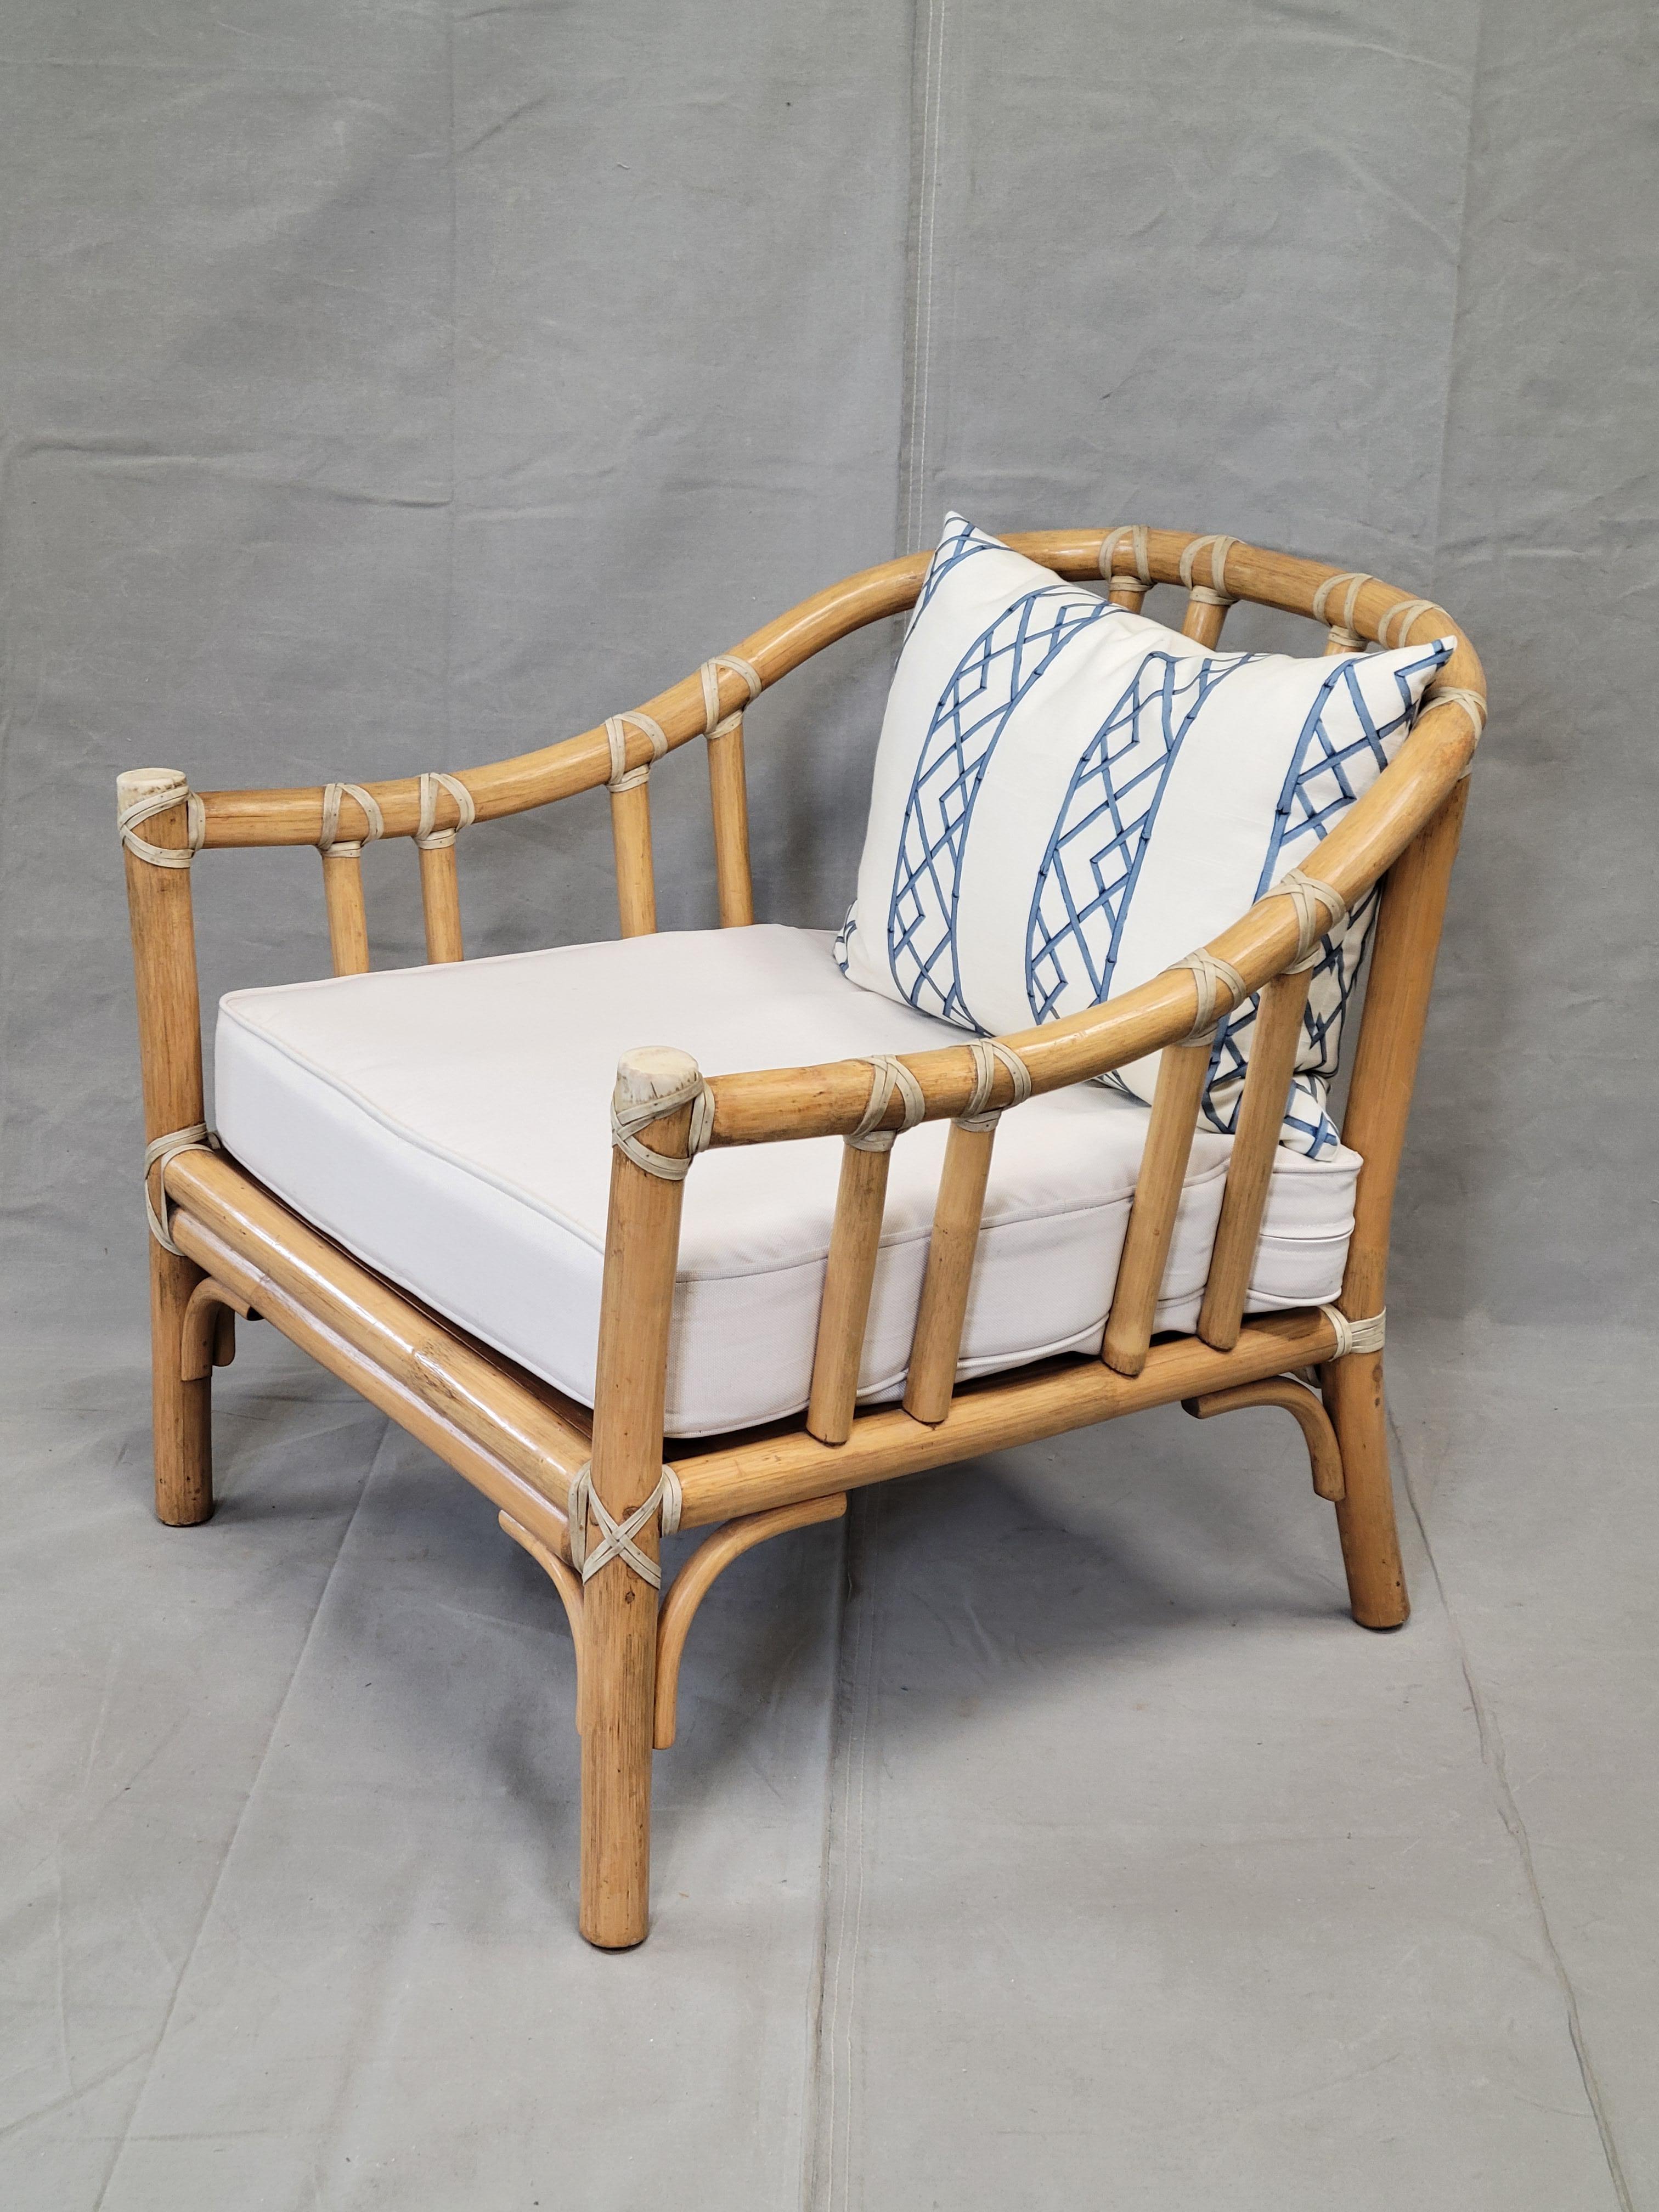 American Vintage 1978 McGuire Bamboo Lounge Chairs With Two Sets of Cushions - a Pair For Sale